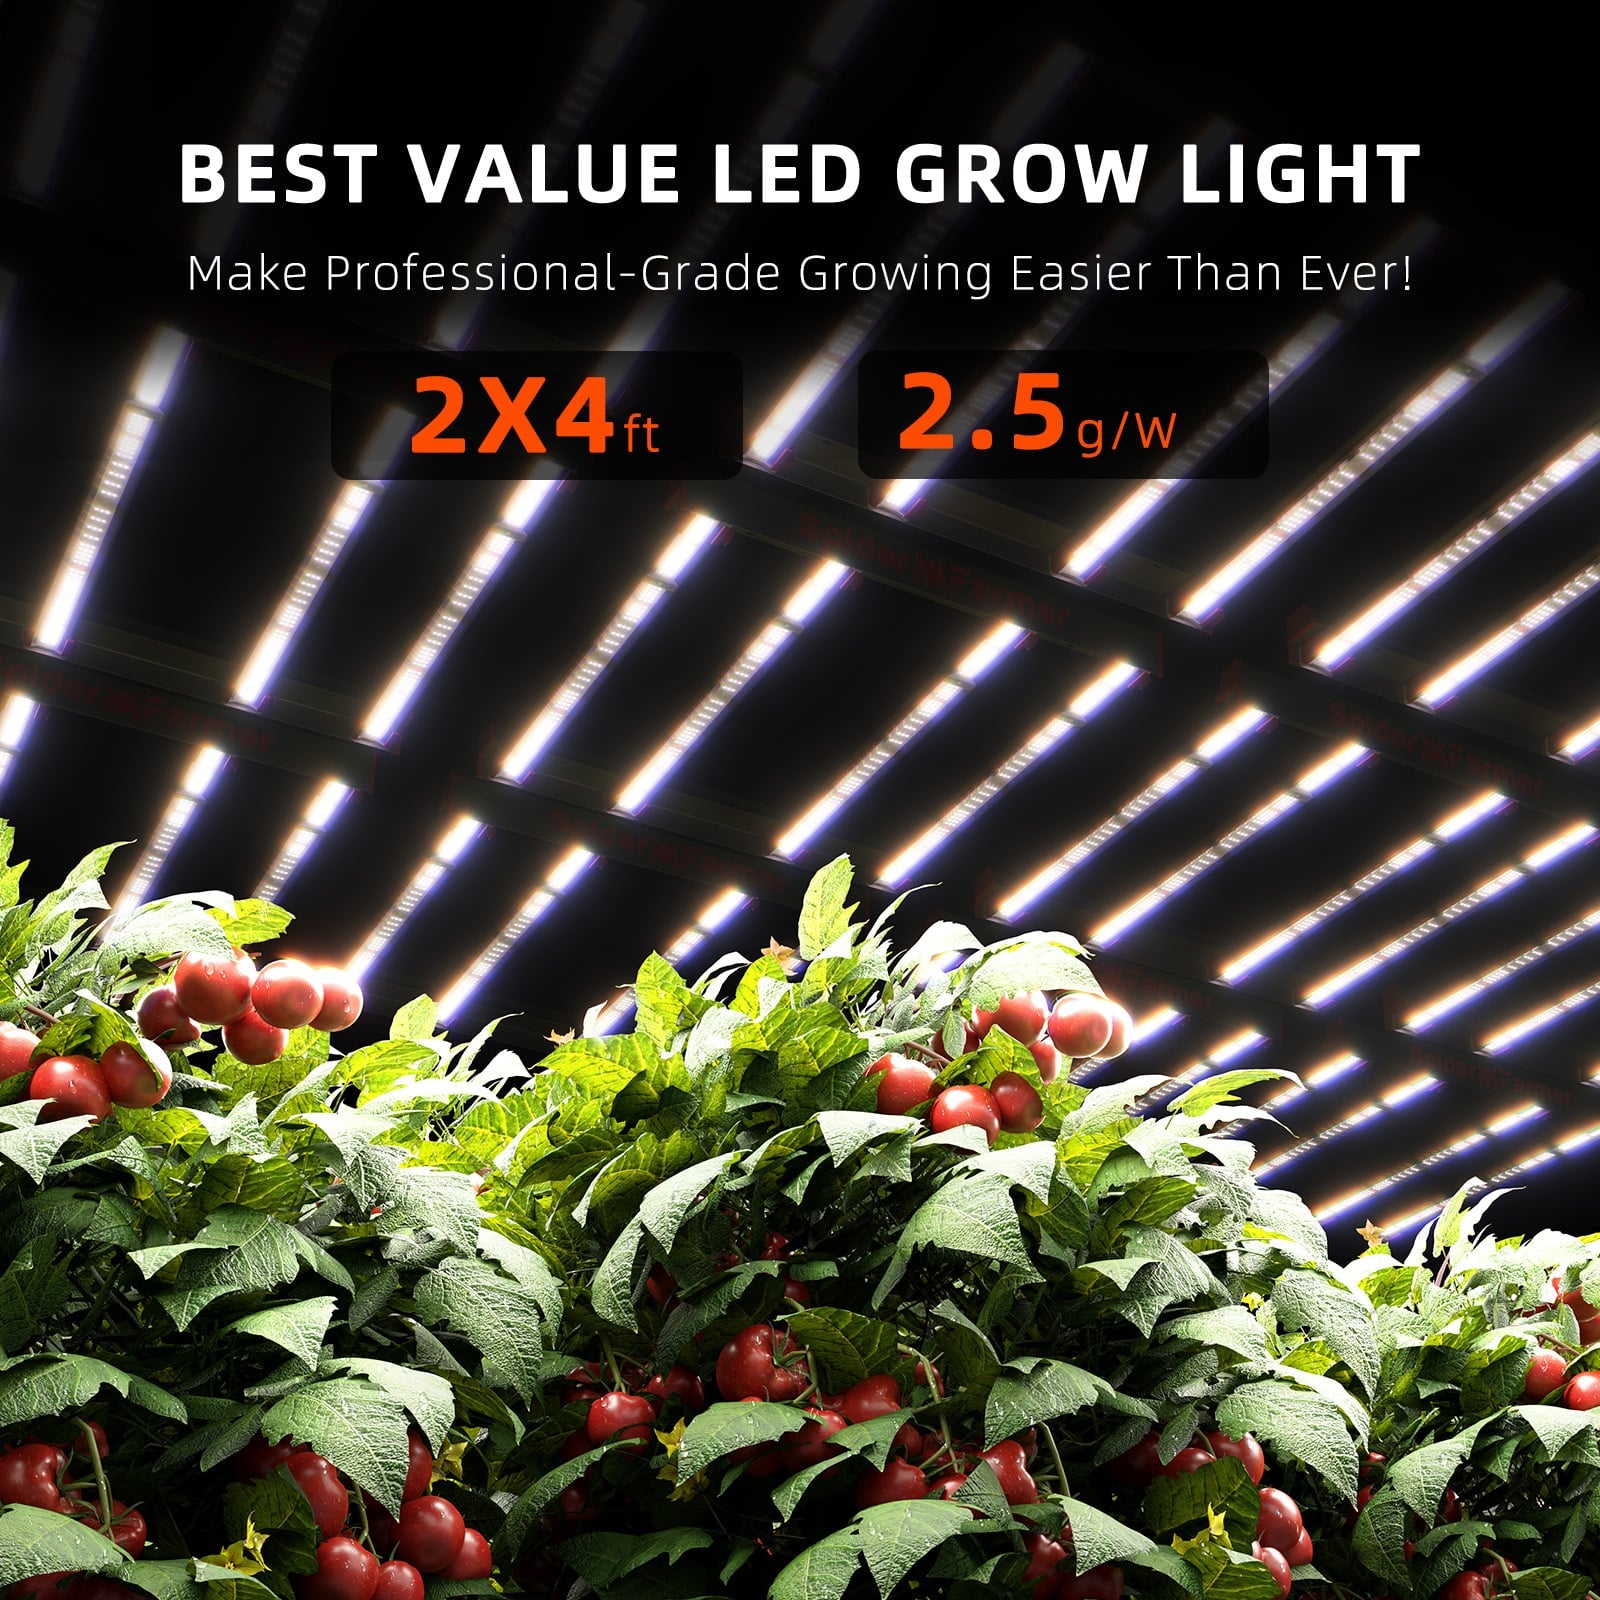 Product Secondary Image:Spider Farmer® G4500 Dimmable Cost-effective Full Spectrum LED Grow Light